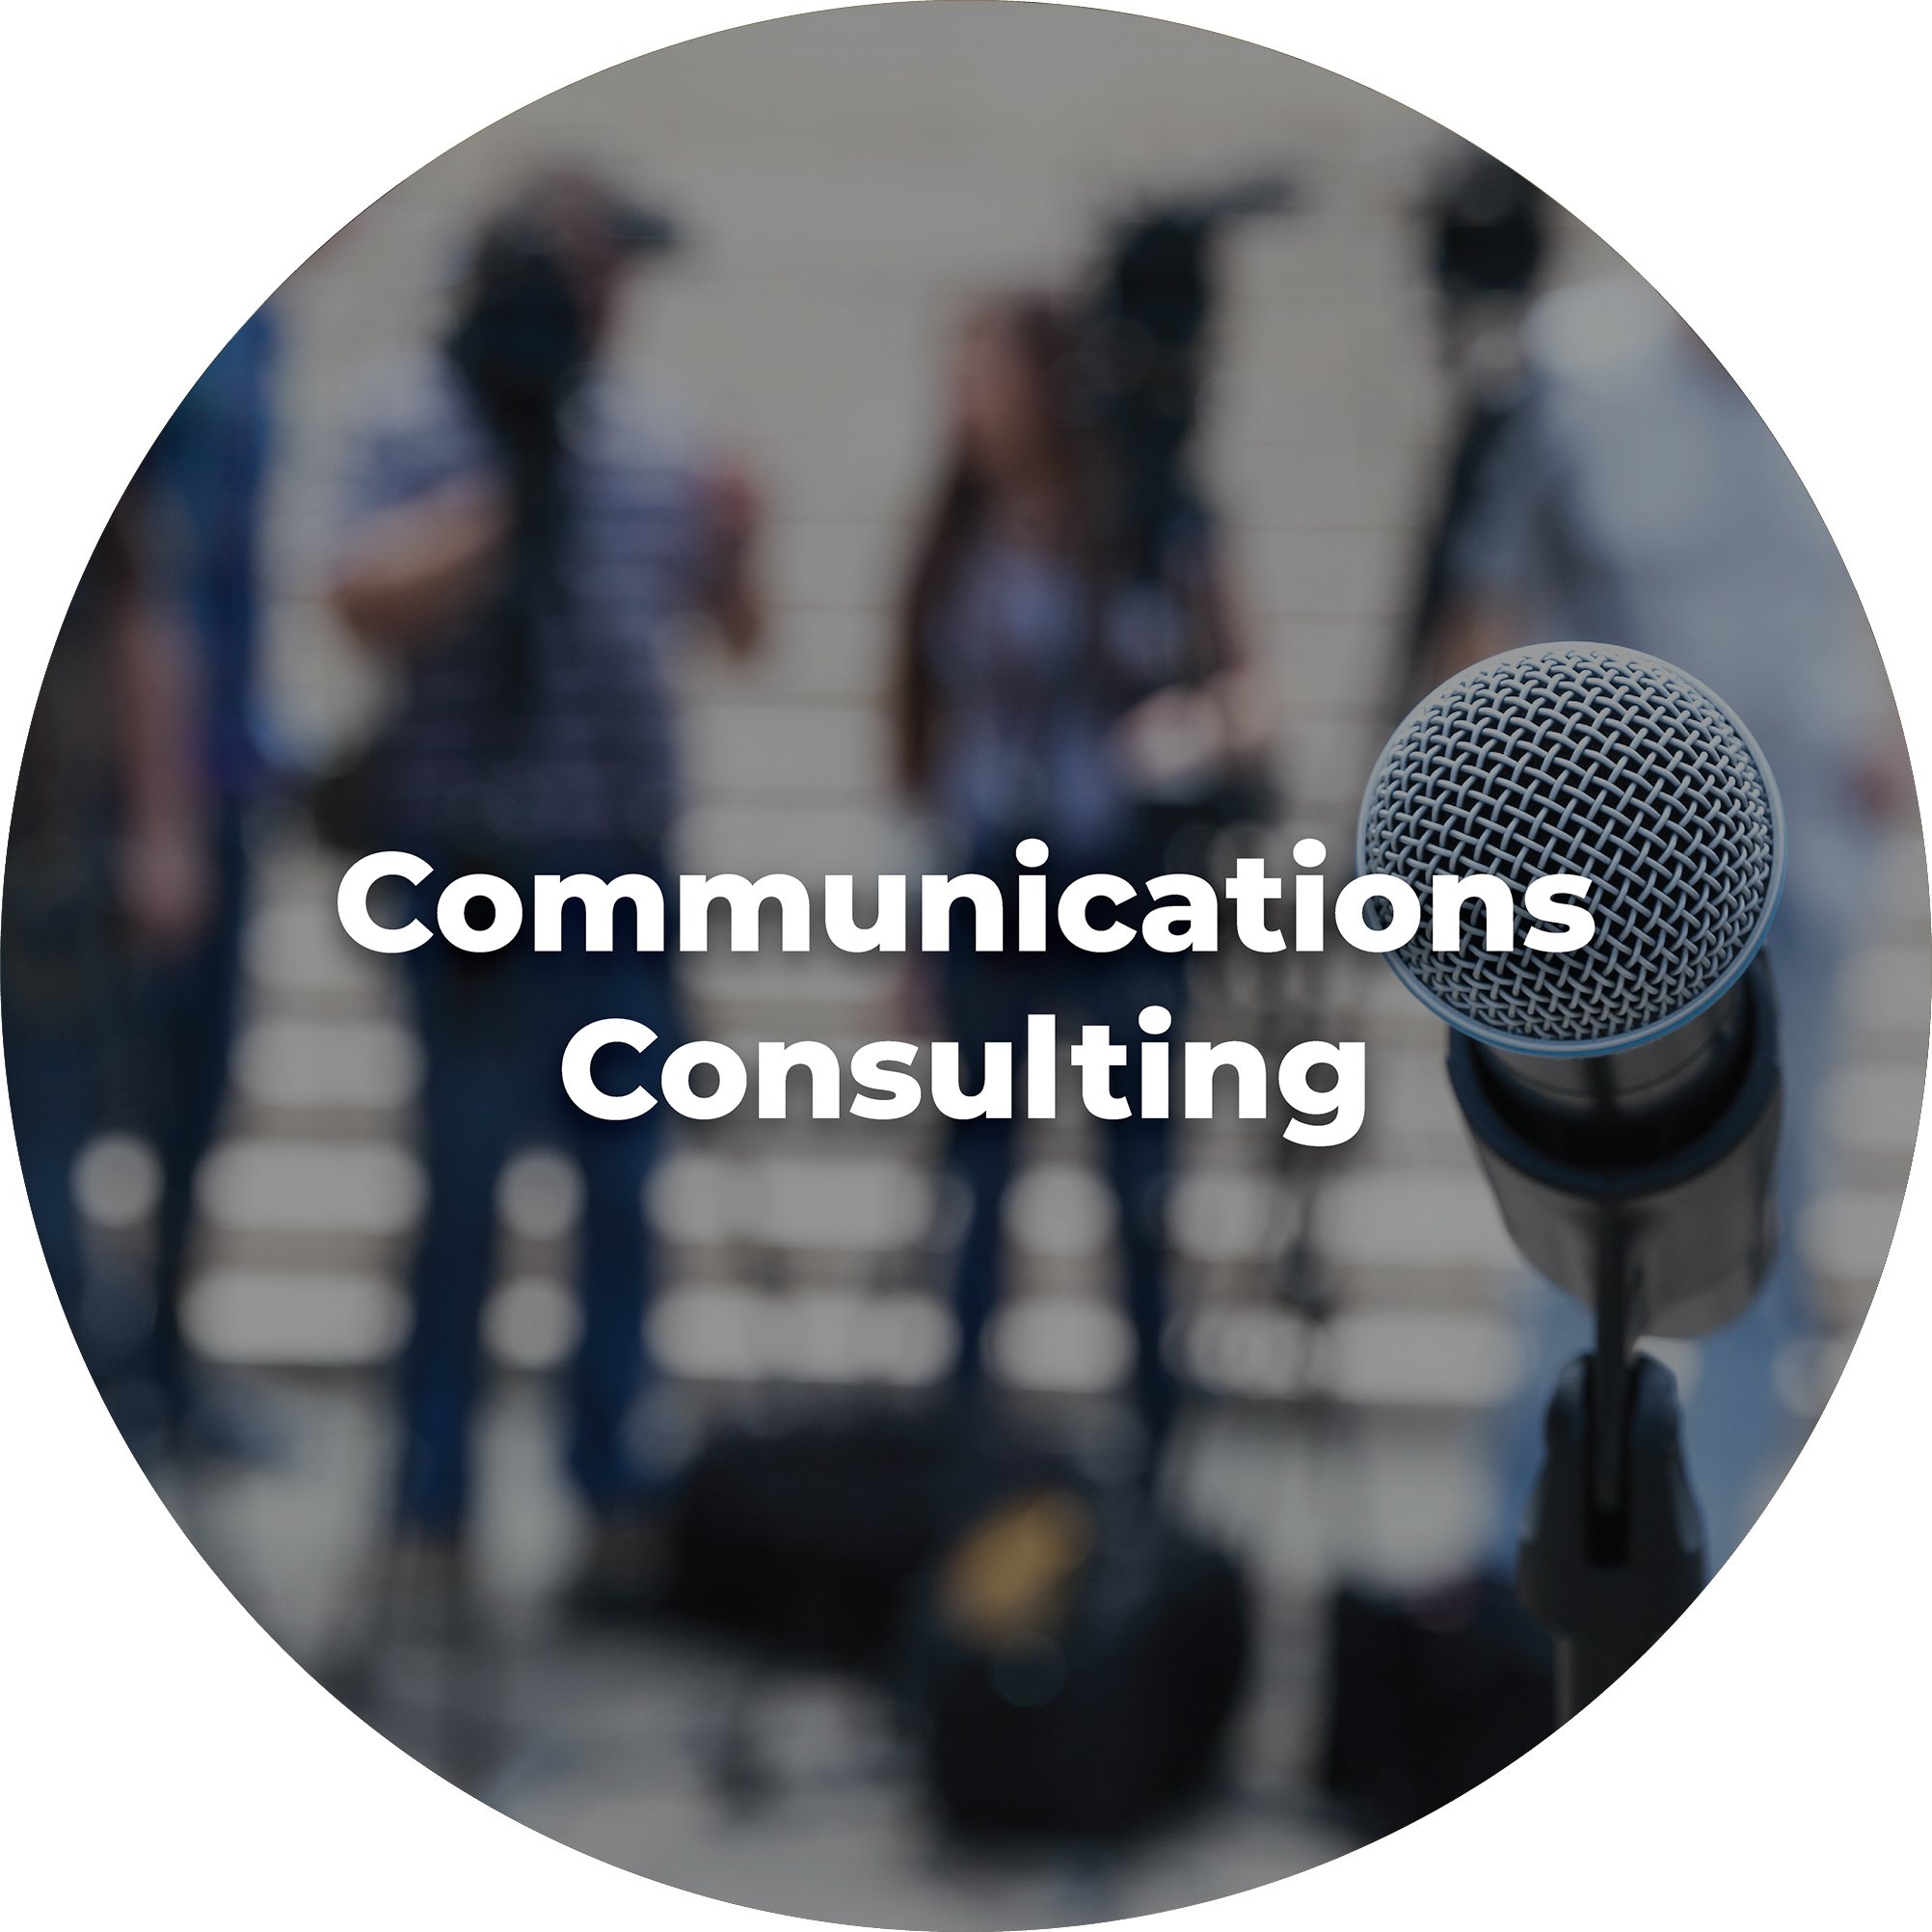 Communications Consulting